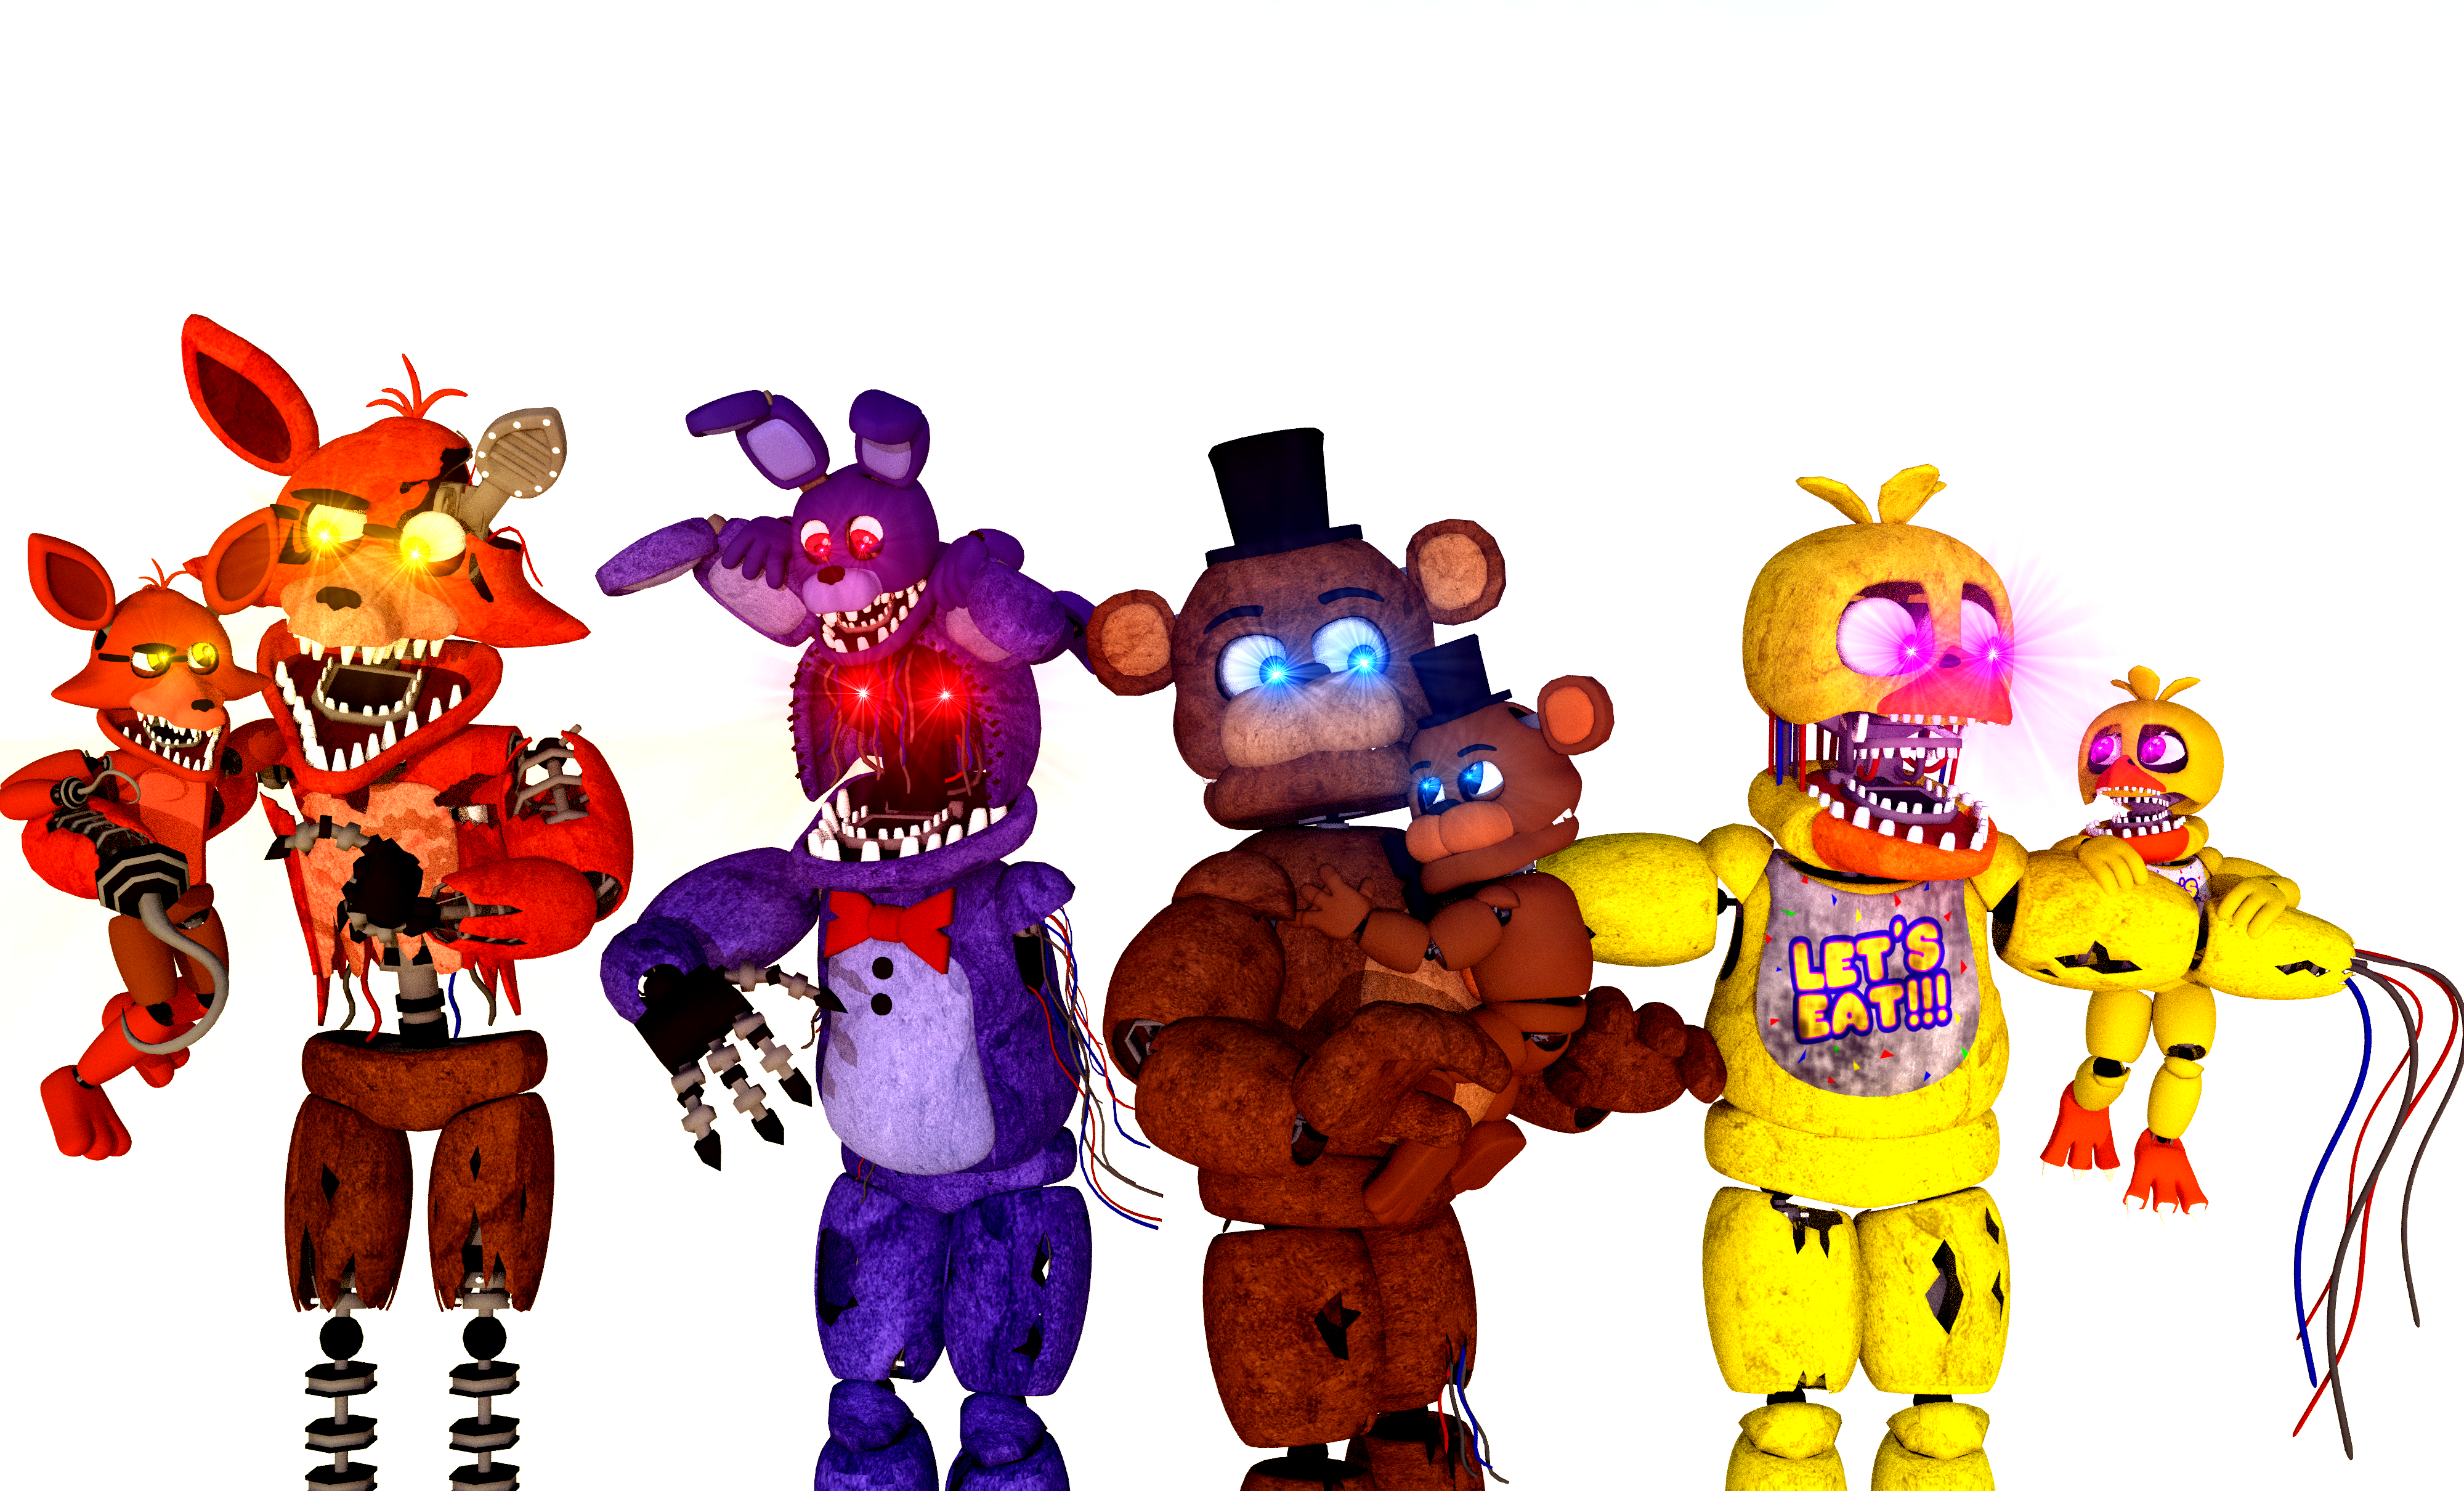 Withered FNAF АНИМАТРОНИКИ. Toy АНИМАТРОНИКИ. Маленькие АНИМАТРОНИКИ игрушки. Добрые игрушки АНИМАТРОНИКОВ. Нужны аниматроники